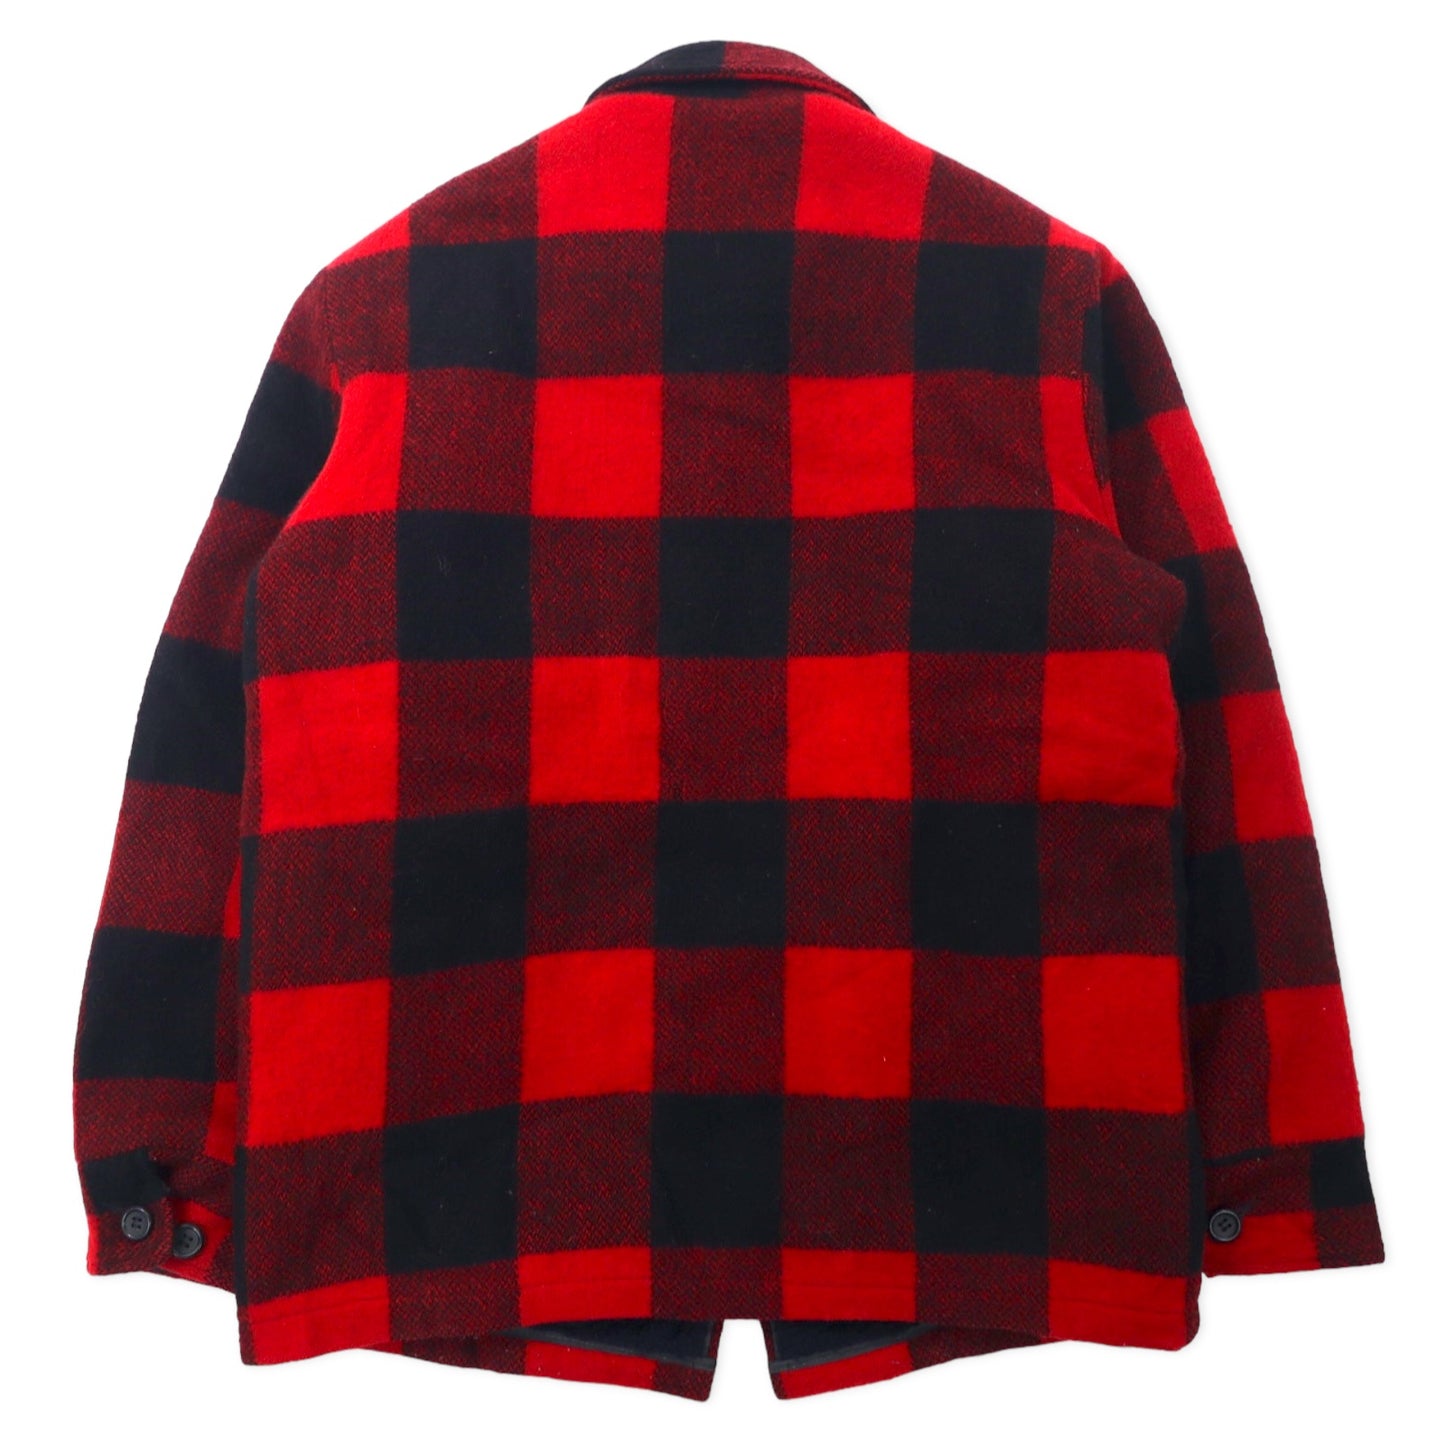 Woolrich USA MADE 70's Buffalo CHECKED Sports Jacket M Red Black 